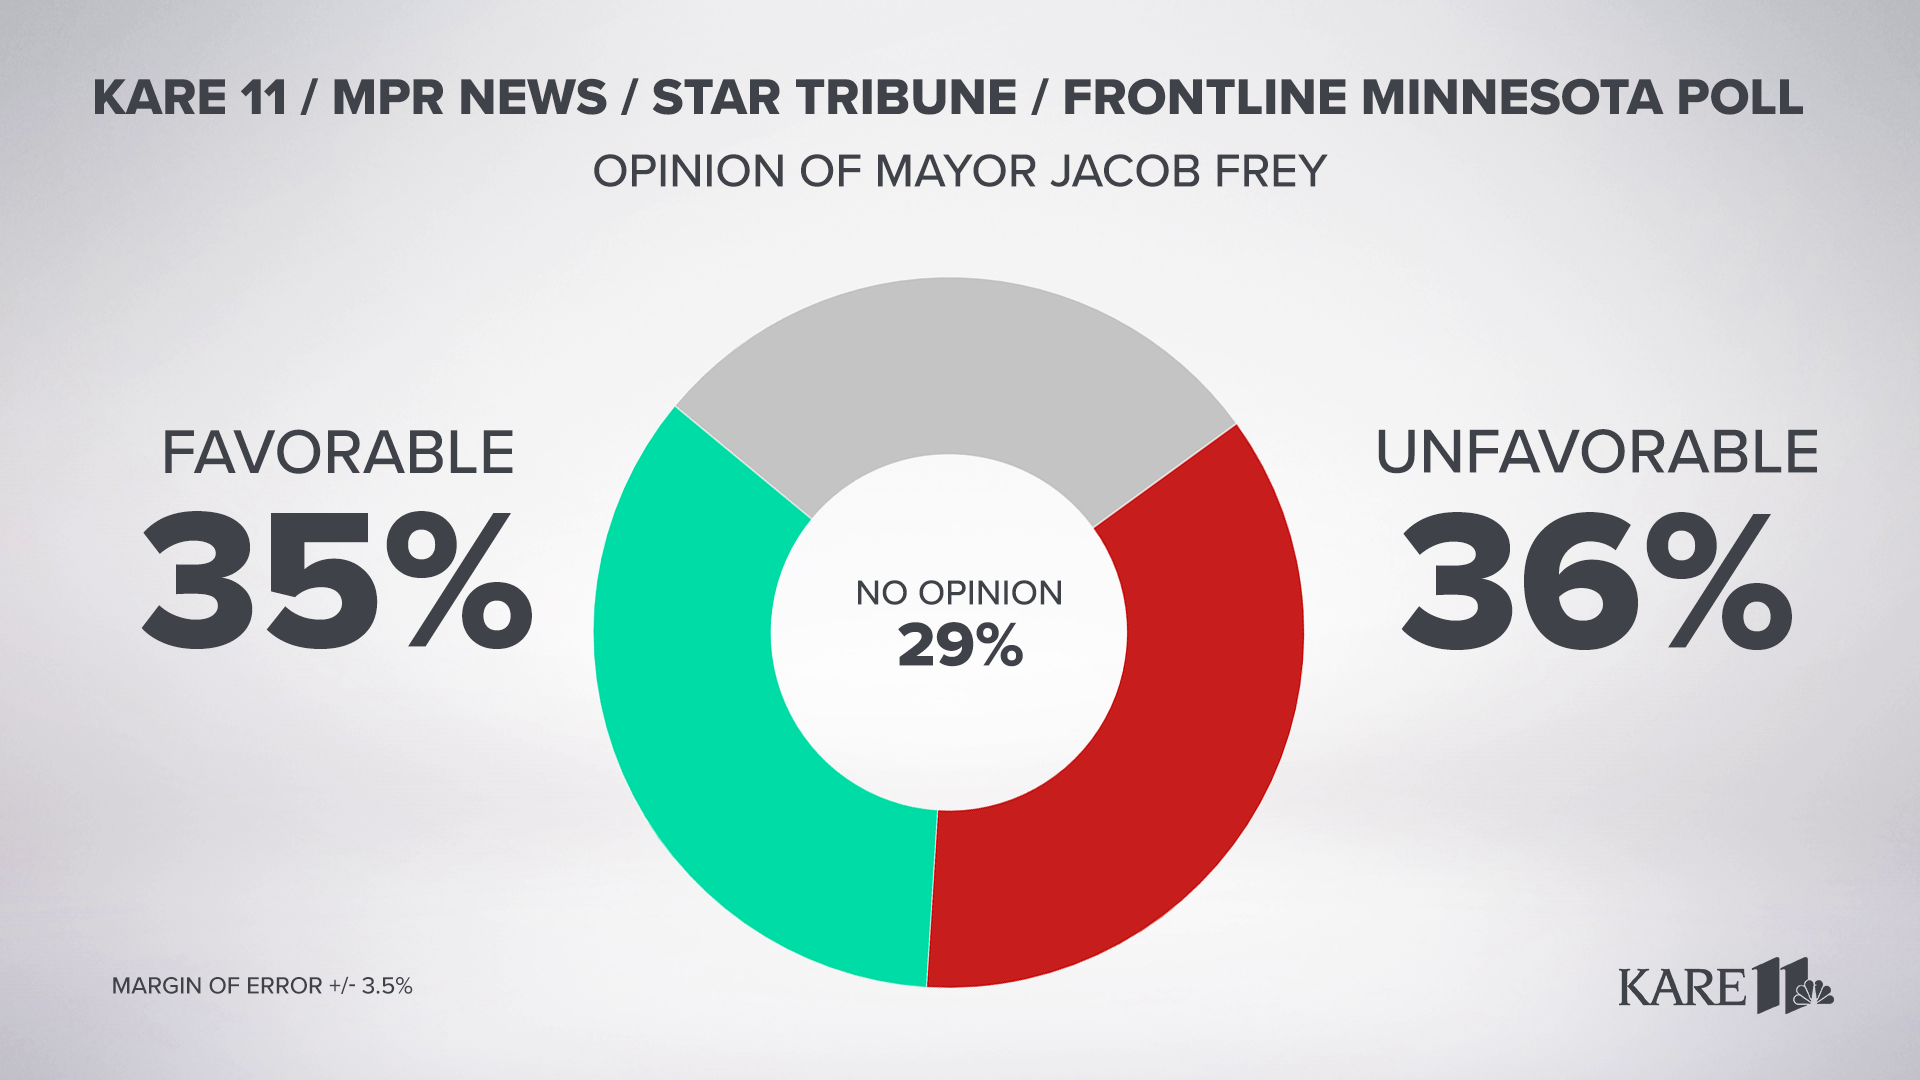 The KARE 11/MPR News/Star Tribune/FRONTLINE Minnesota Poll also examined views on the three city charter questions on the November ballot.